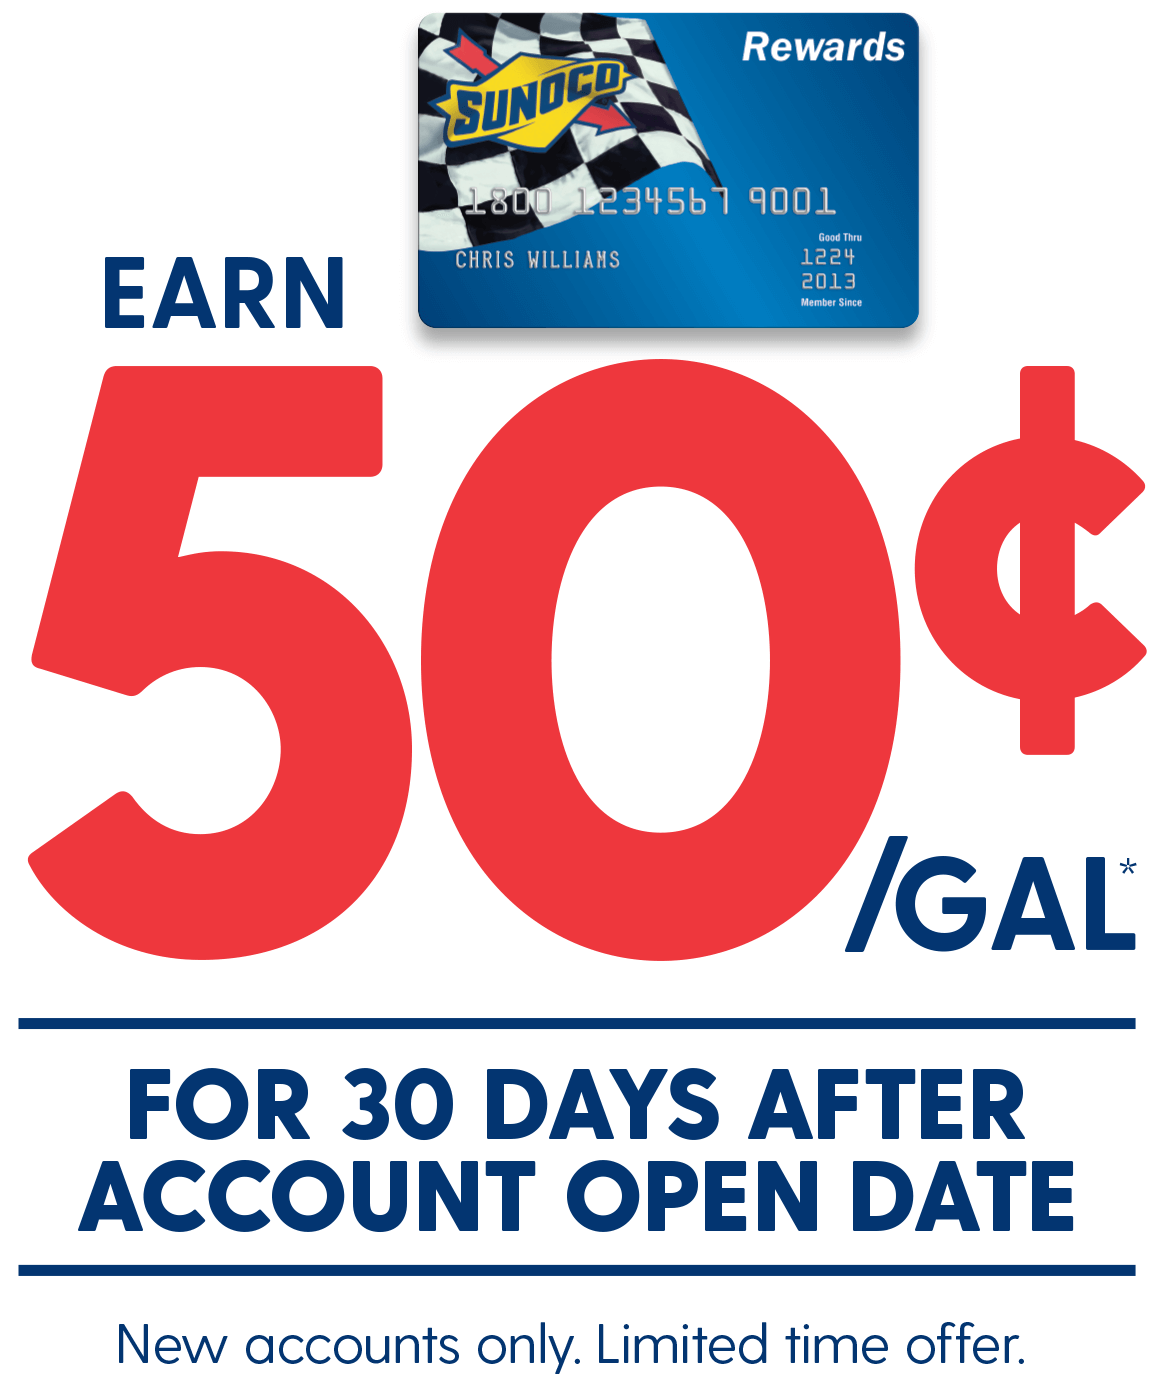 Earn 50 cents off per gallon for 30 days after account open date